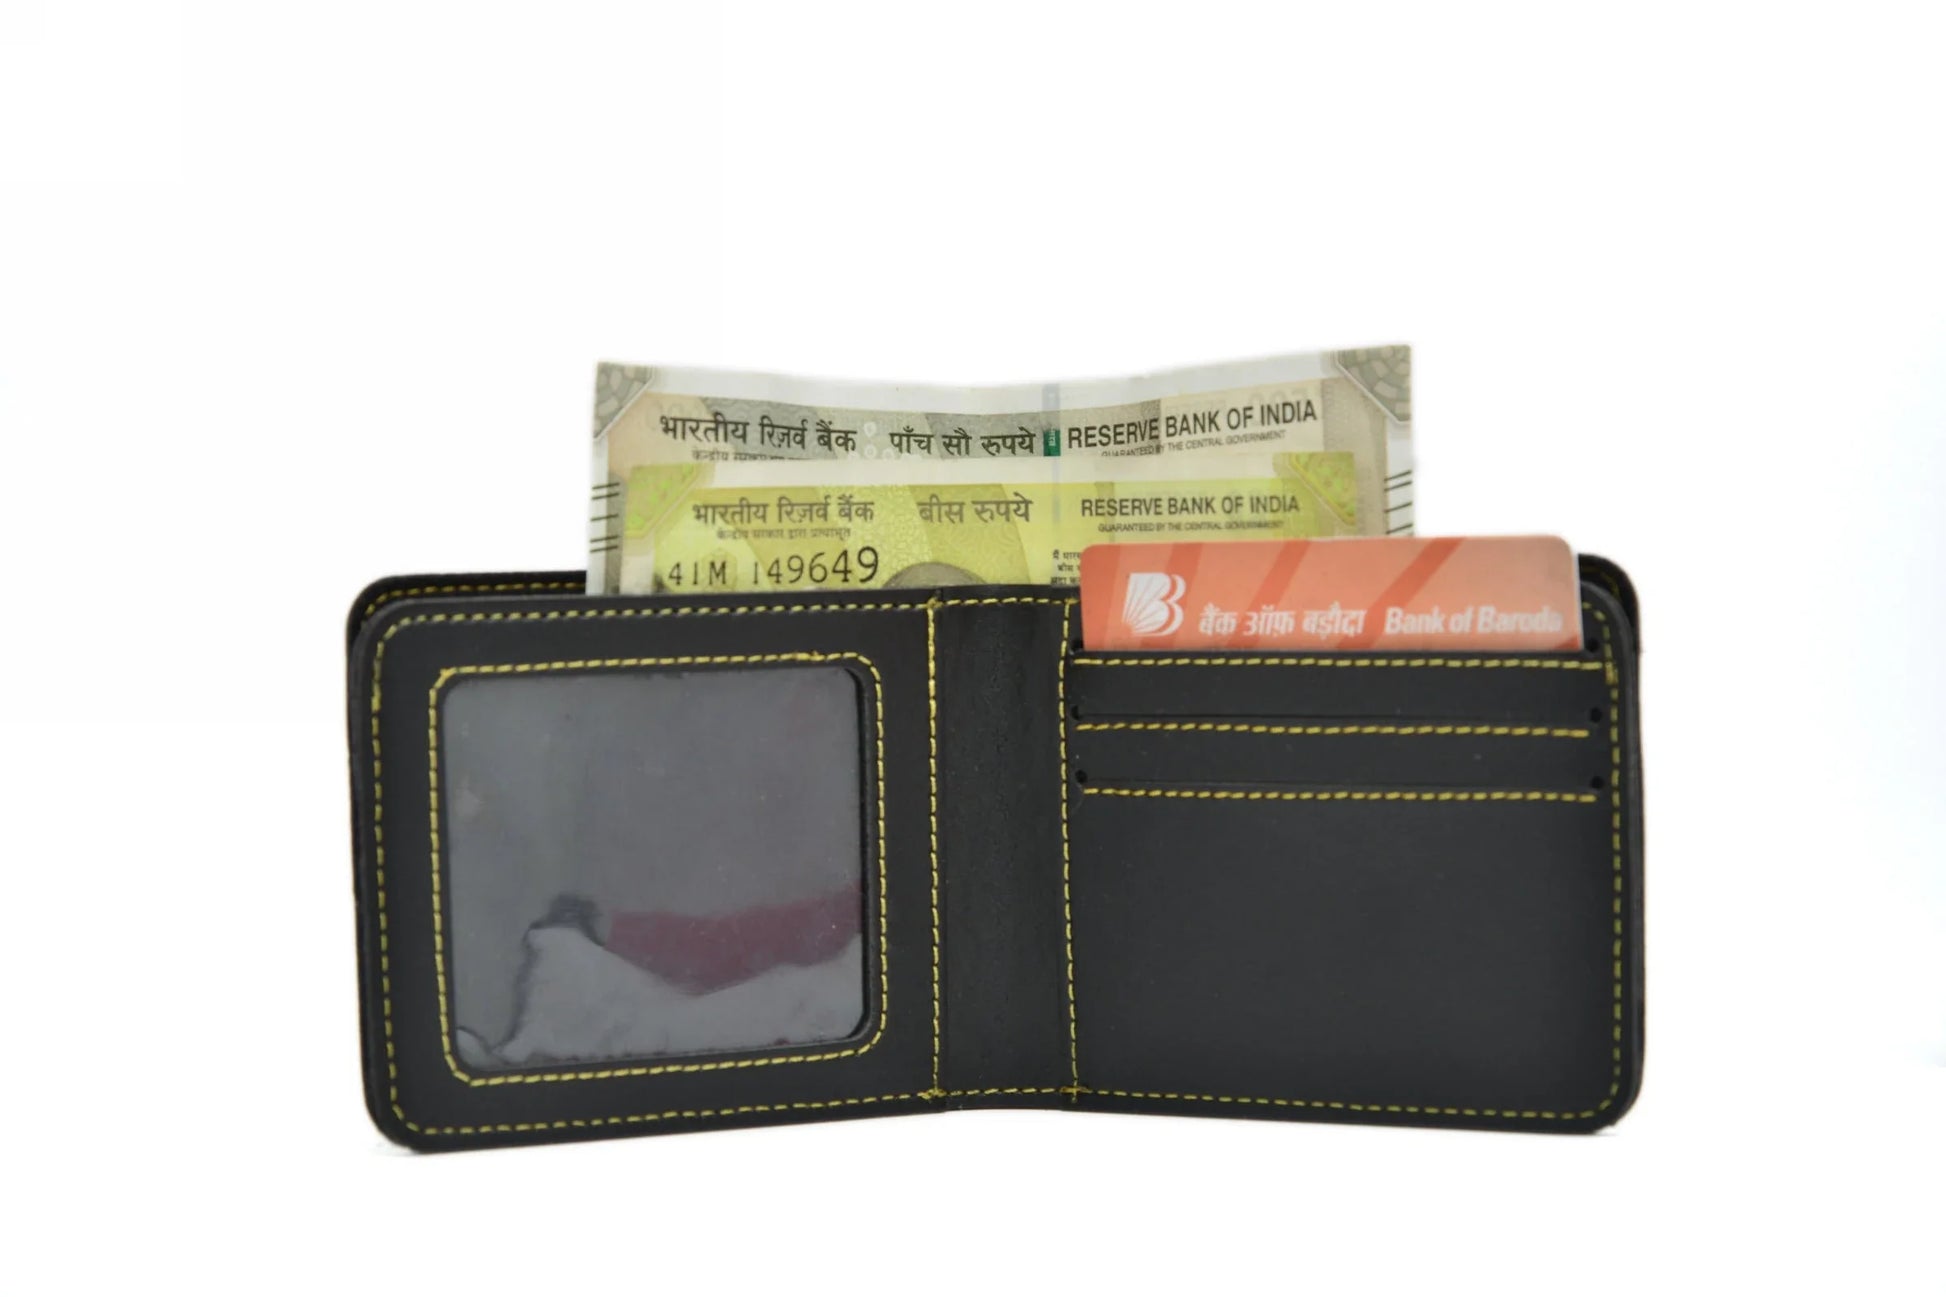 Get your premium-quality, classy, affordable and elegant wallet now!personalized-mens-wallet-black-customized-best-gift-for-boyfriend-girlfriend. Personalized Men's Wallet - Black.Classy wallet made with the top-notch quality vegan leather is the perfect touch to any office/formal attire.The best part is that faux, synthetic leather is very durable. Go classy with this fashionable and trending wallet. 